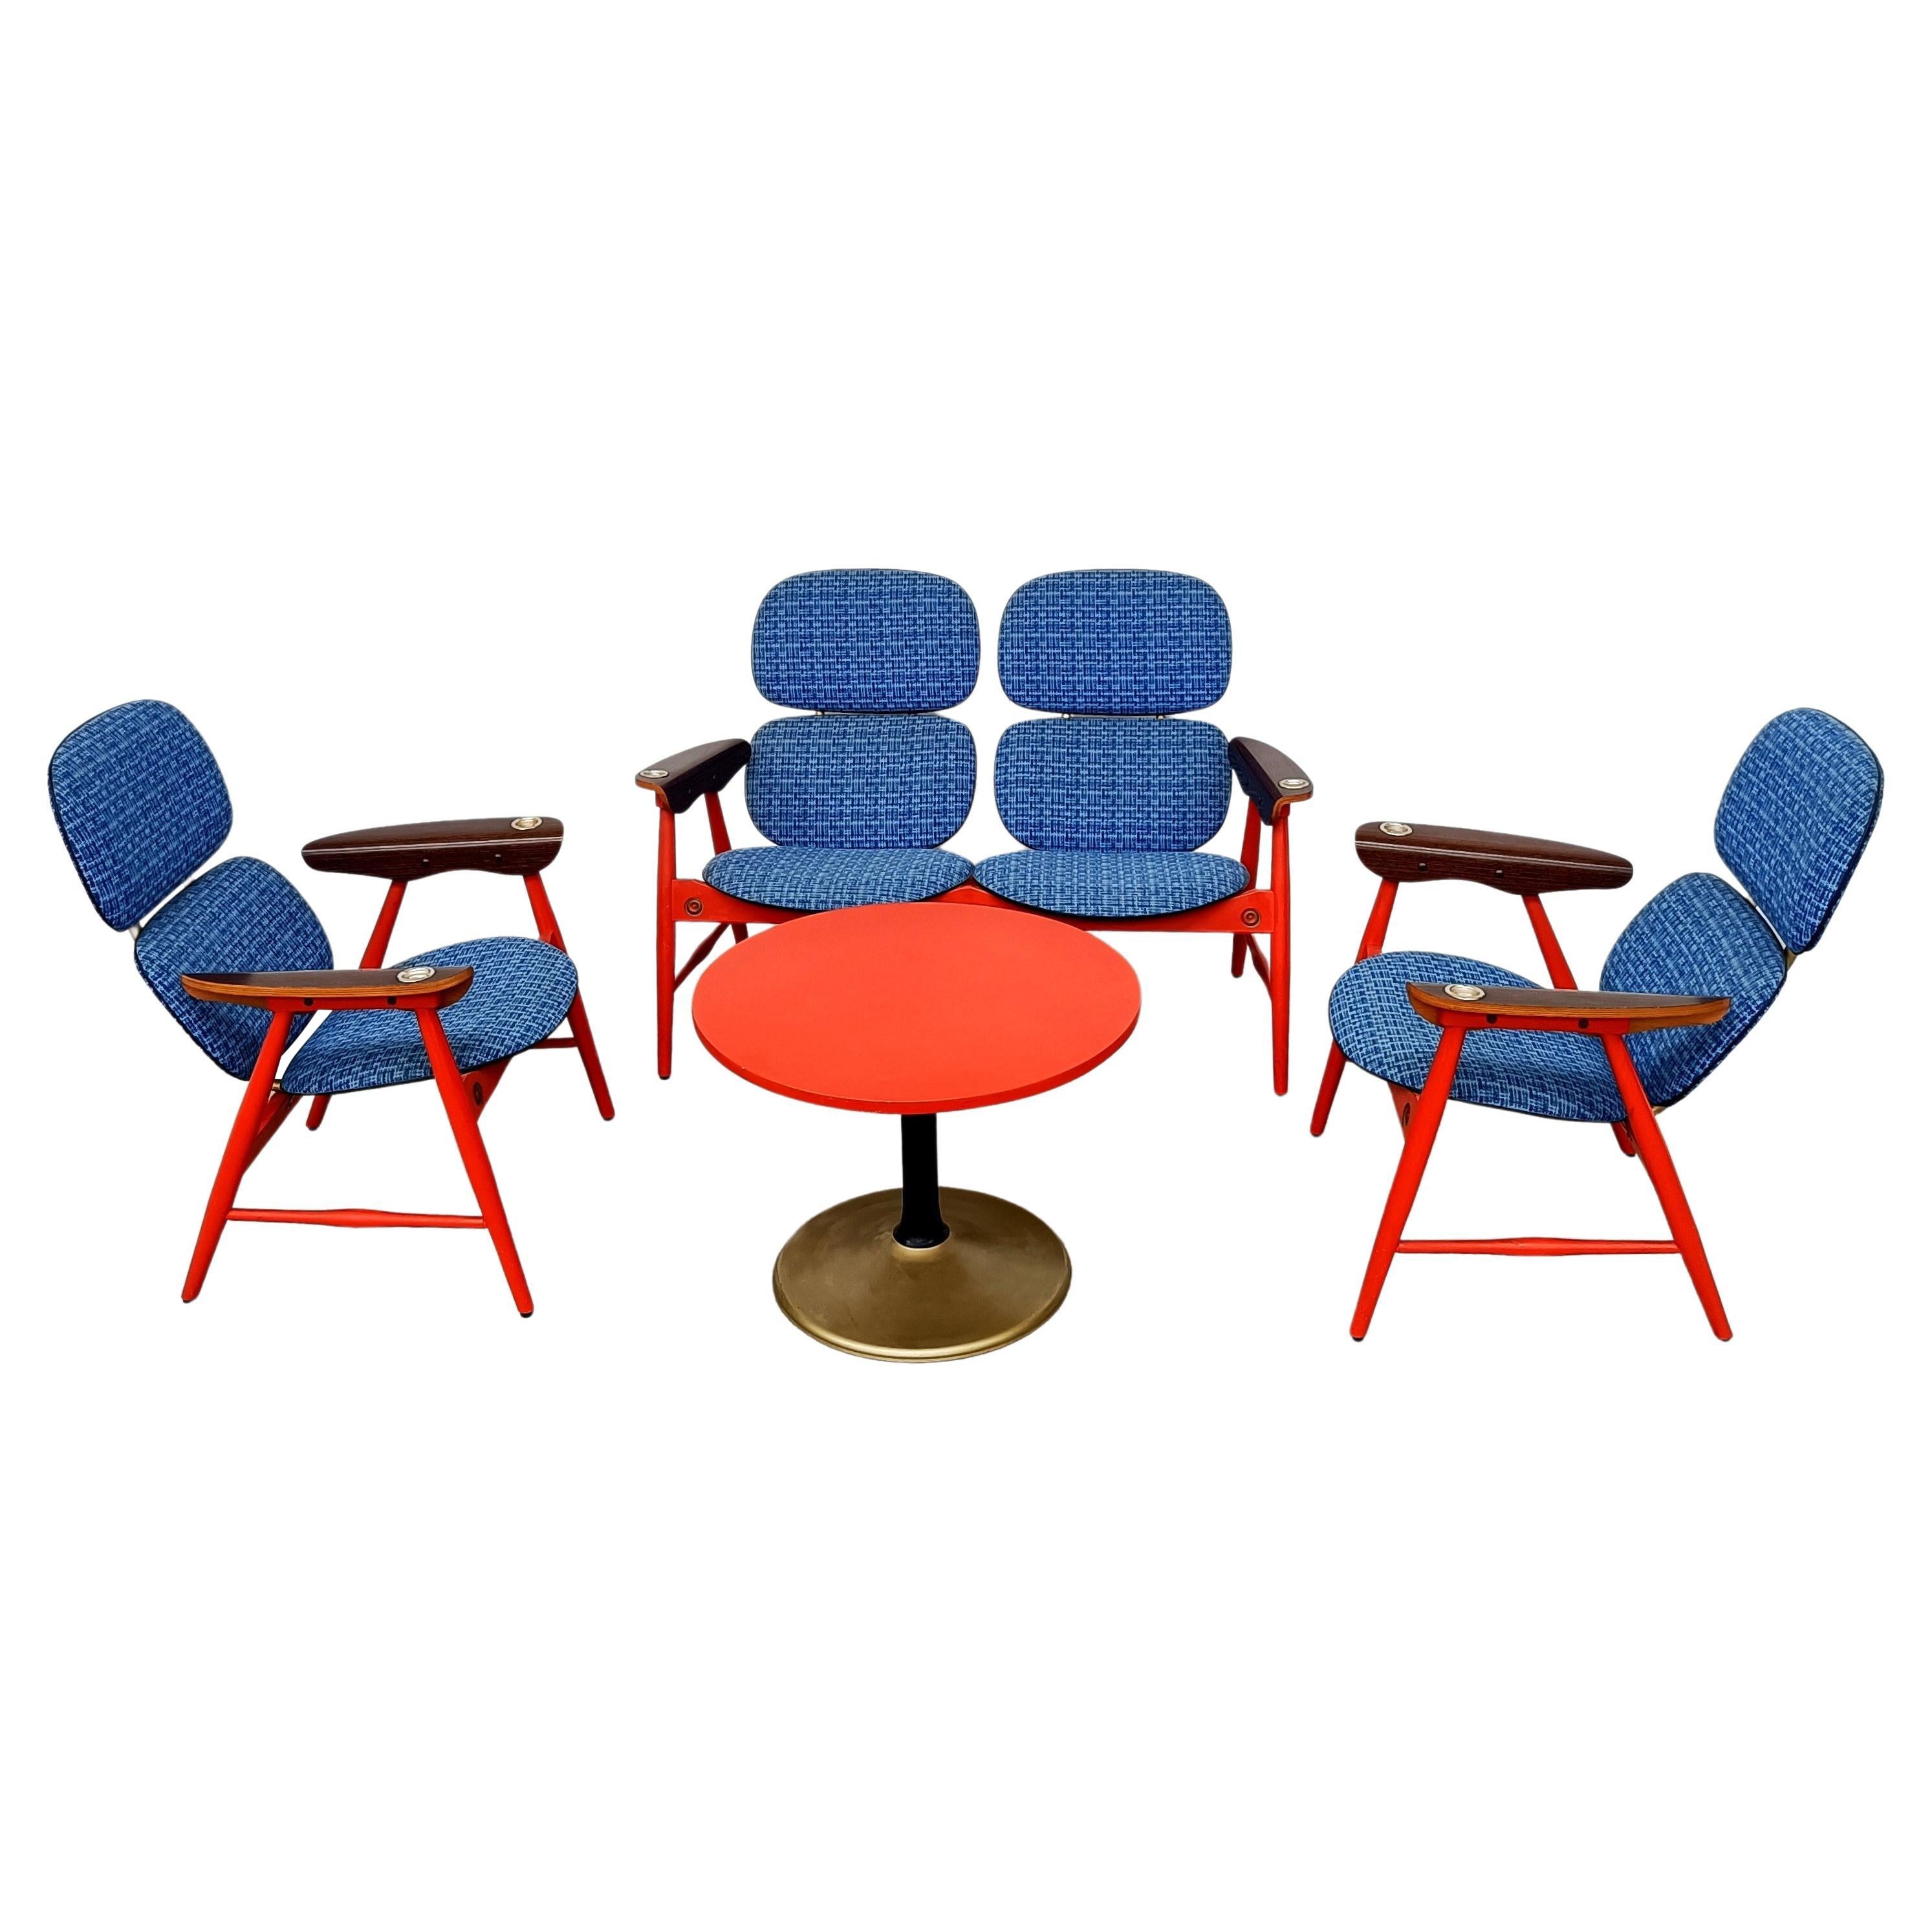 Living Room Set, Armchairs, Loveaseat Table by Marco Zanuso for Poltronova 60s